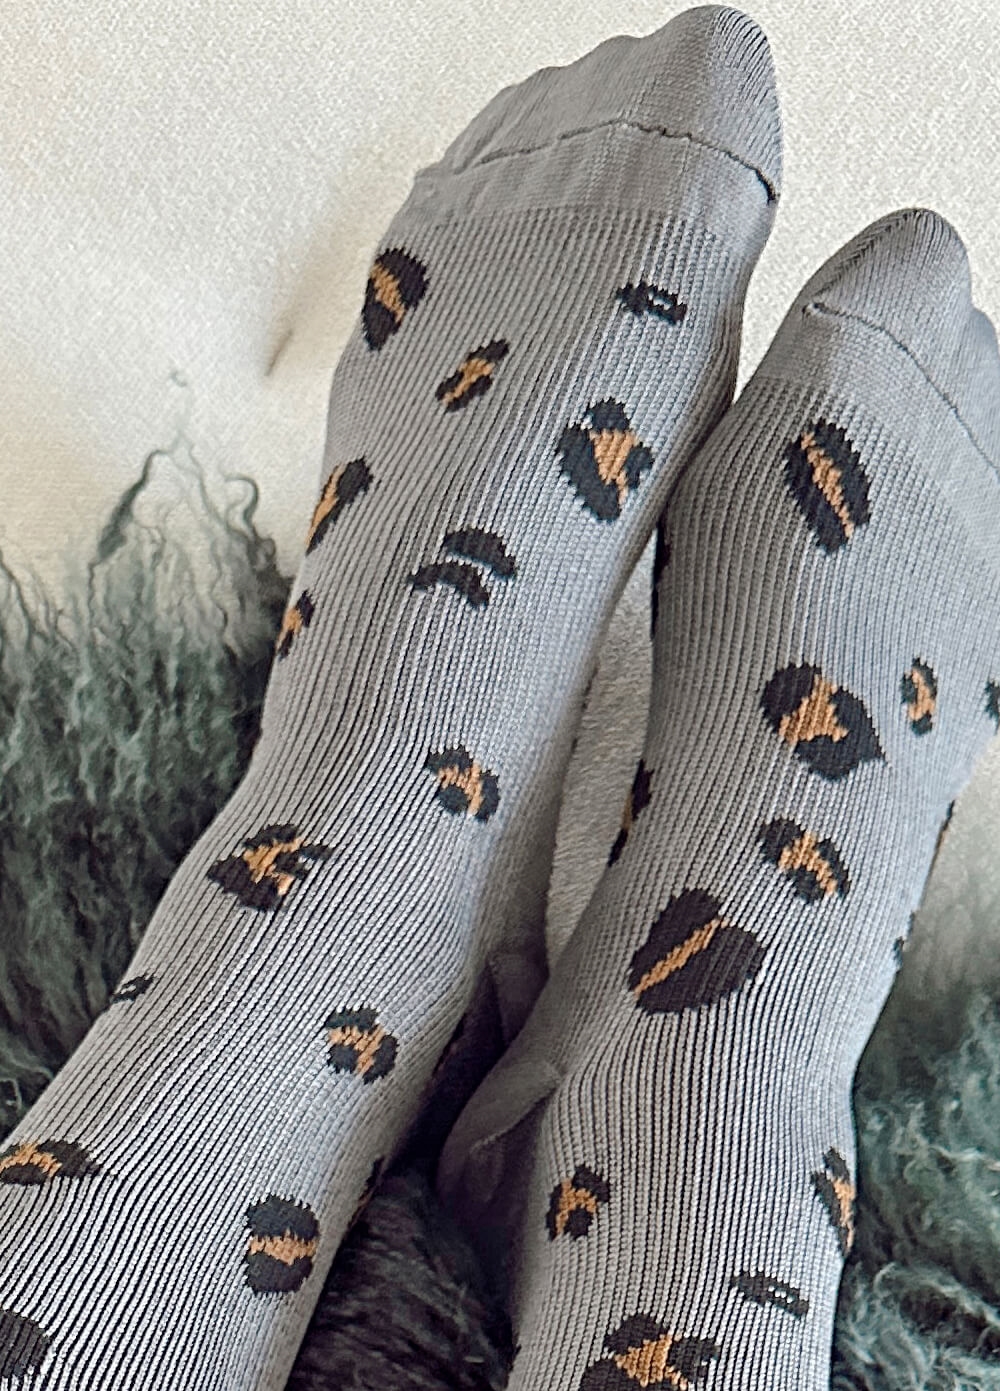 Mama Sox - Excite Maternity Compression Socks in Grey Leopard